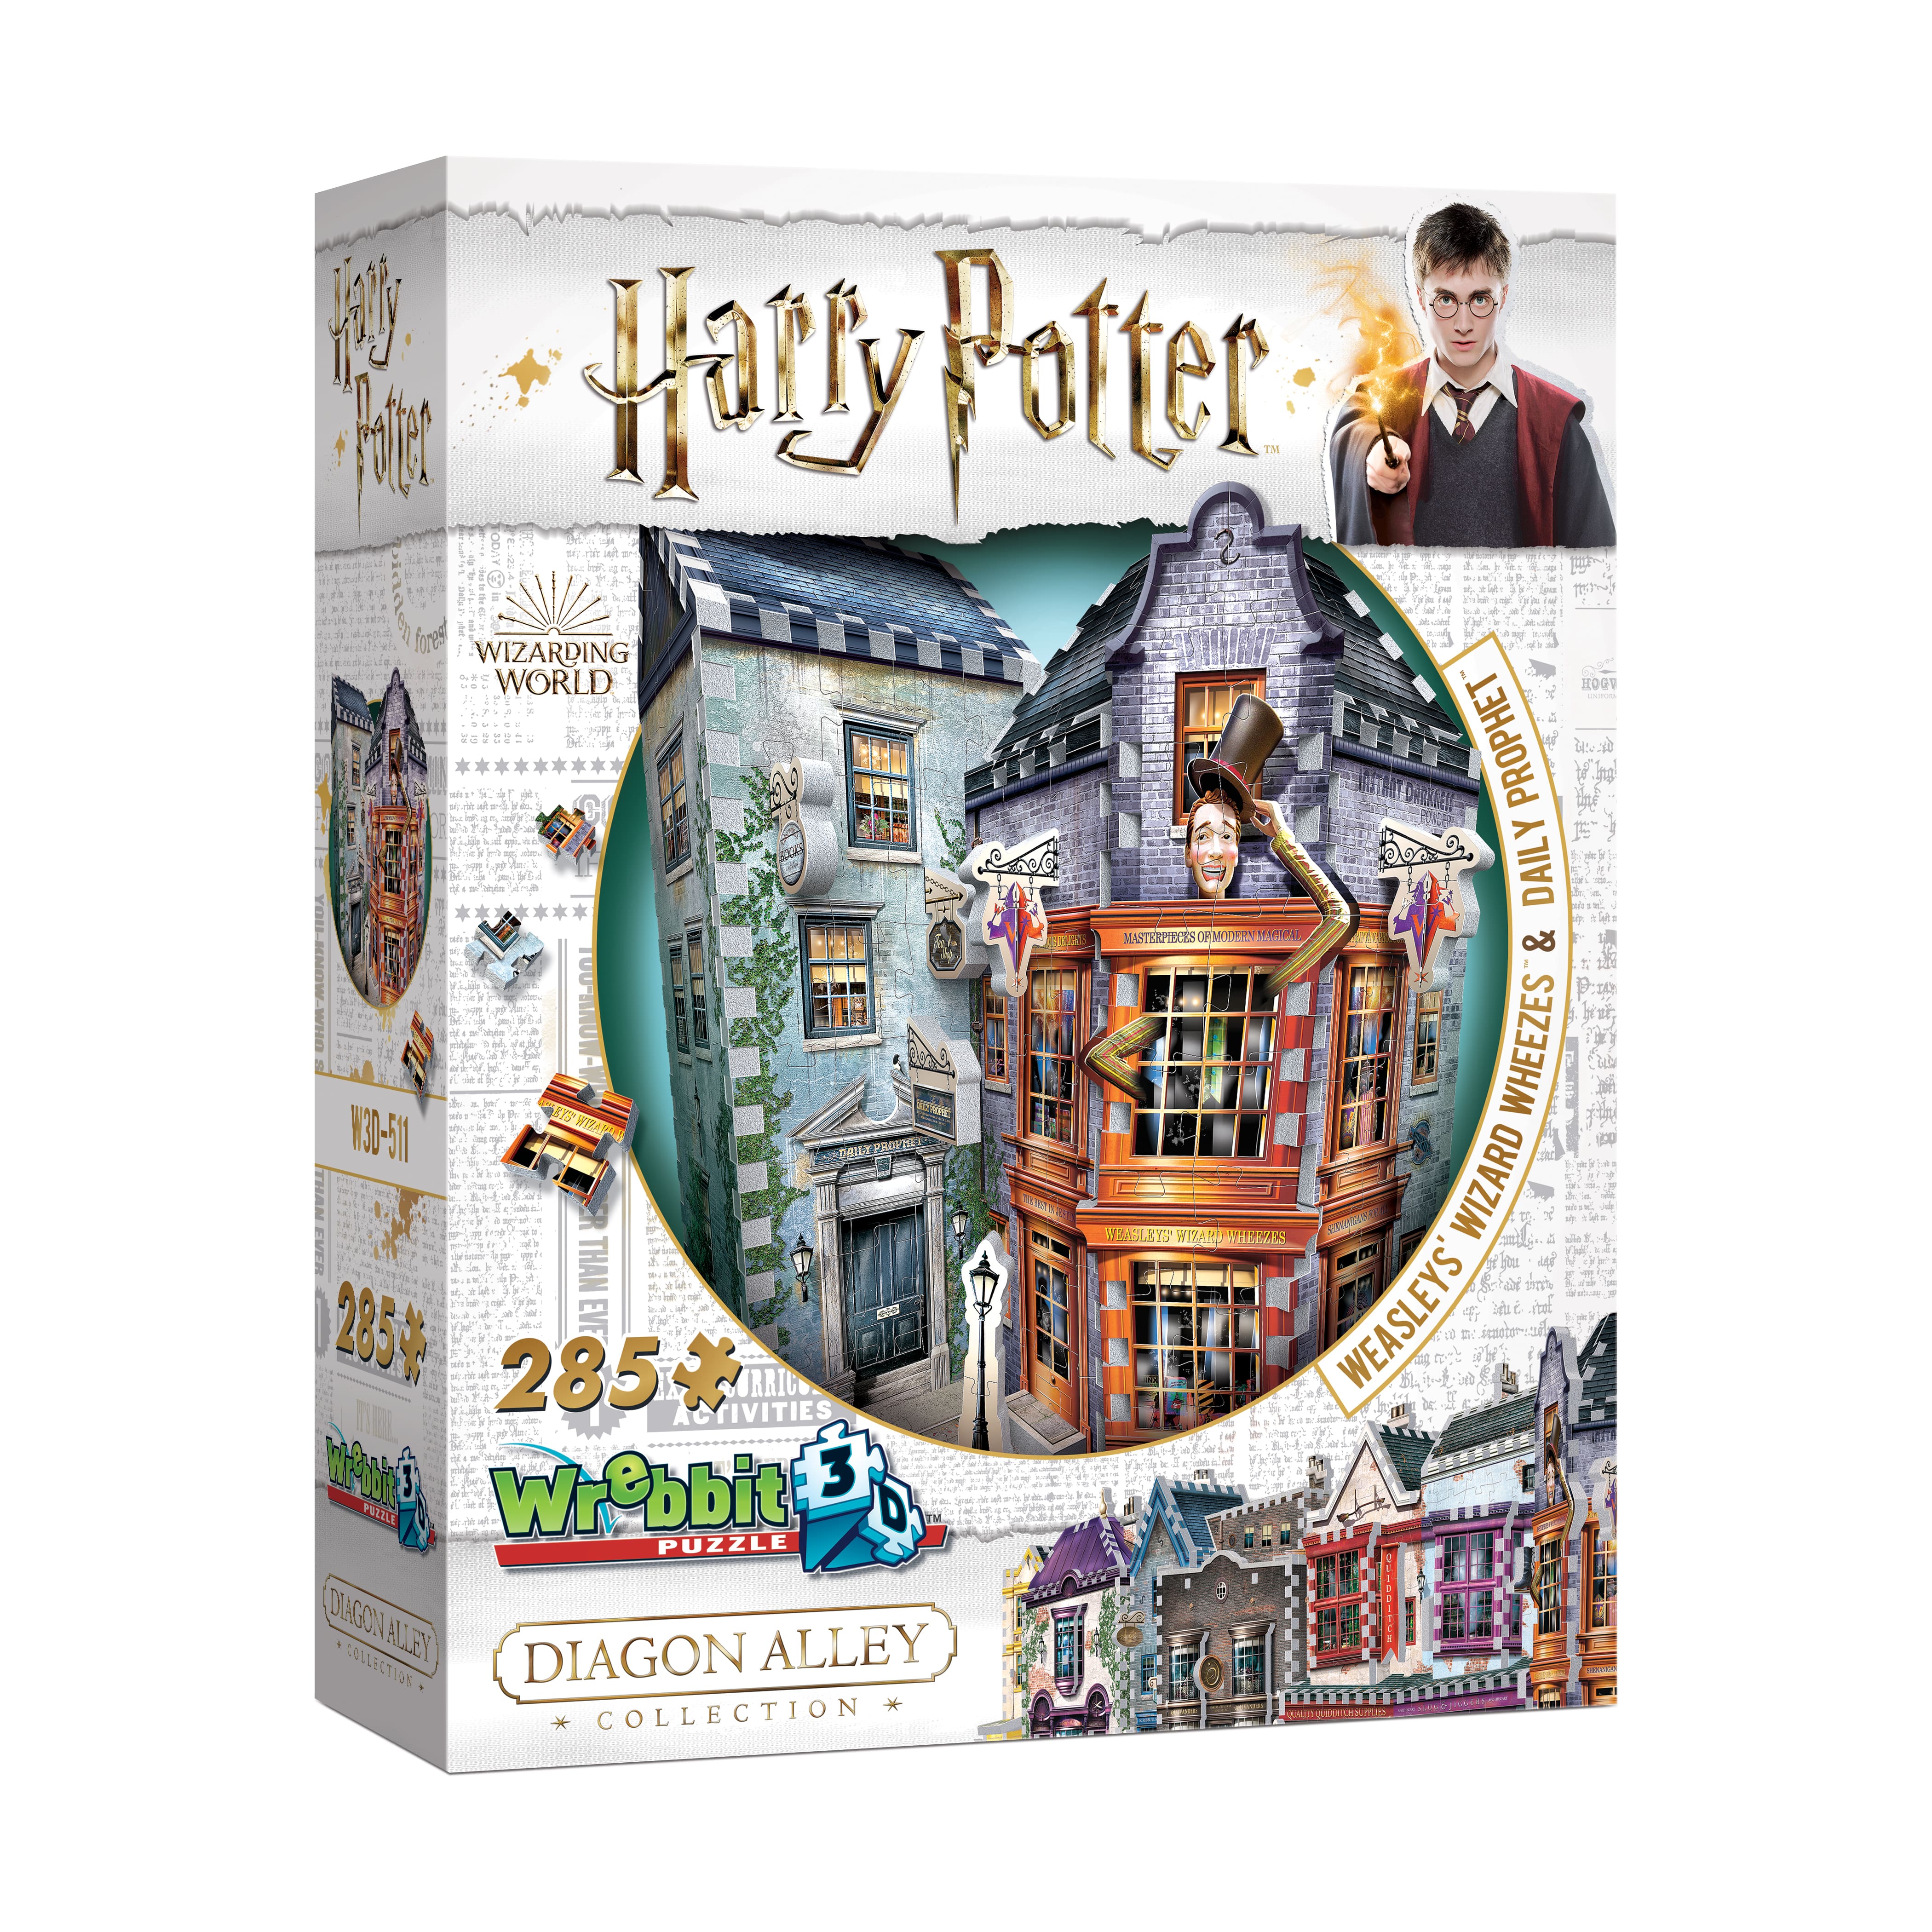 Harry Potter&#x2122; Diagon Alley Collection Weasleys&#x27; Wizard Wheezes&#x2122; &#x26; Daily Prophet&#x2122; 285 Piece 3D Puzzle